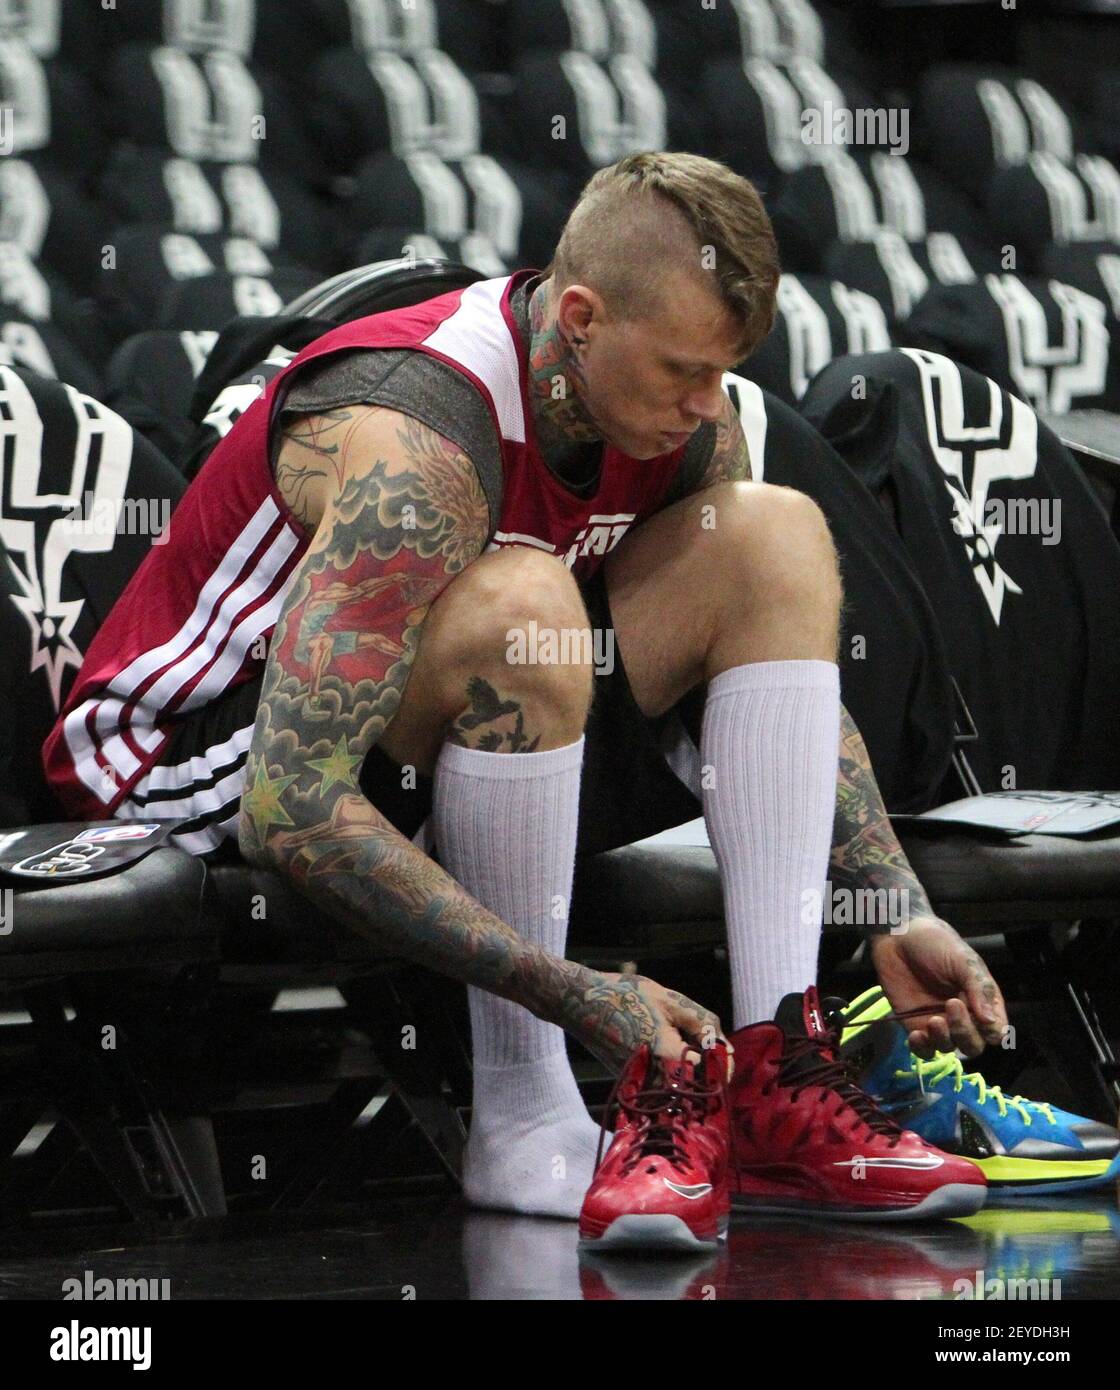 Miami Heat's Chris Andersen looks up during an NBA basketball game